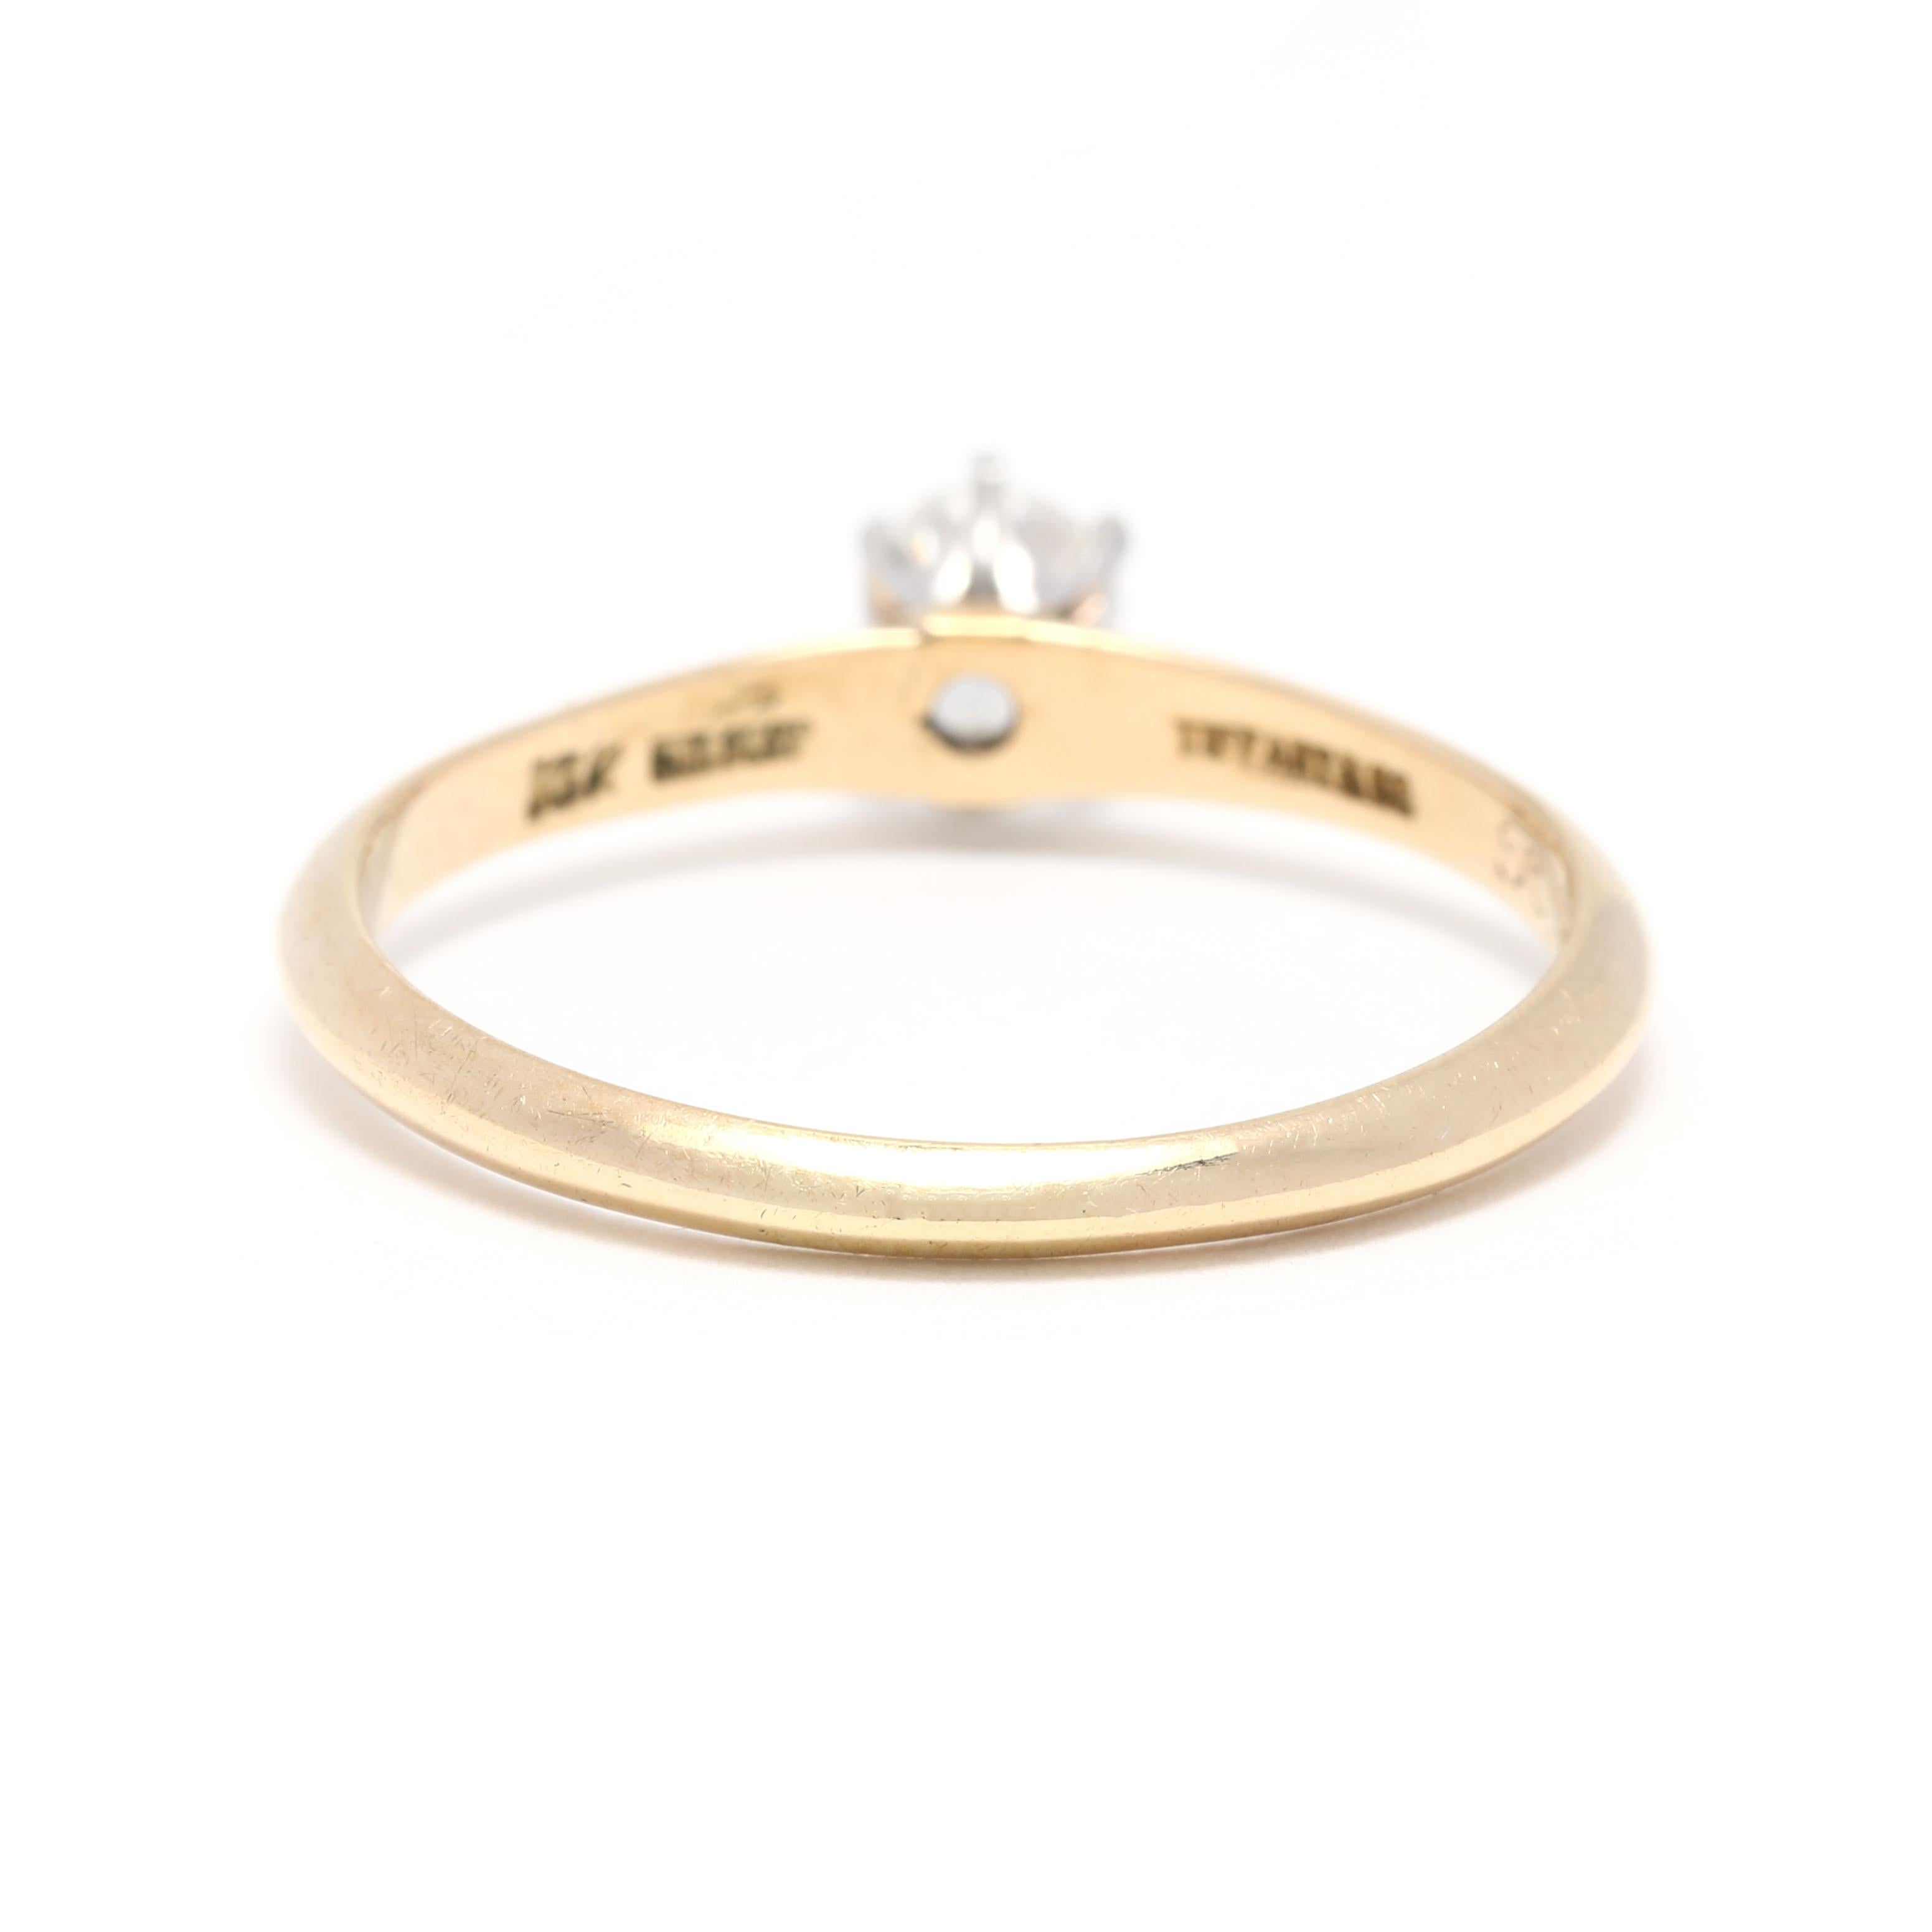 Old European Cut Retro Tiffany and Co. Diamond Solitaire Engagement Ring, Platinum 18kyg, Rs. 7.5